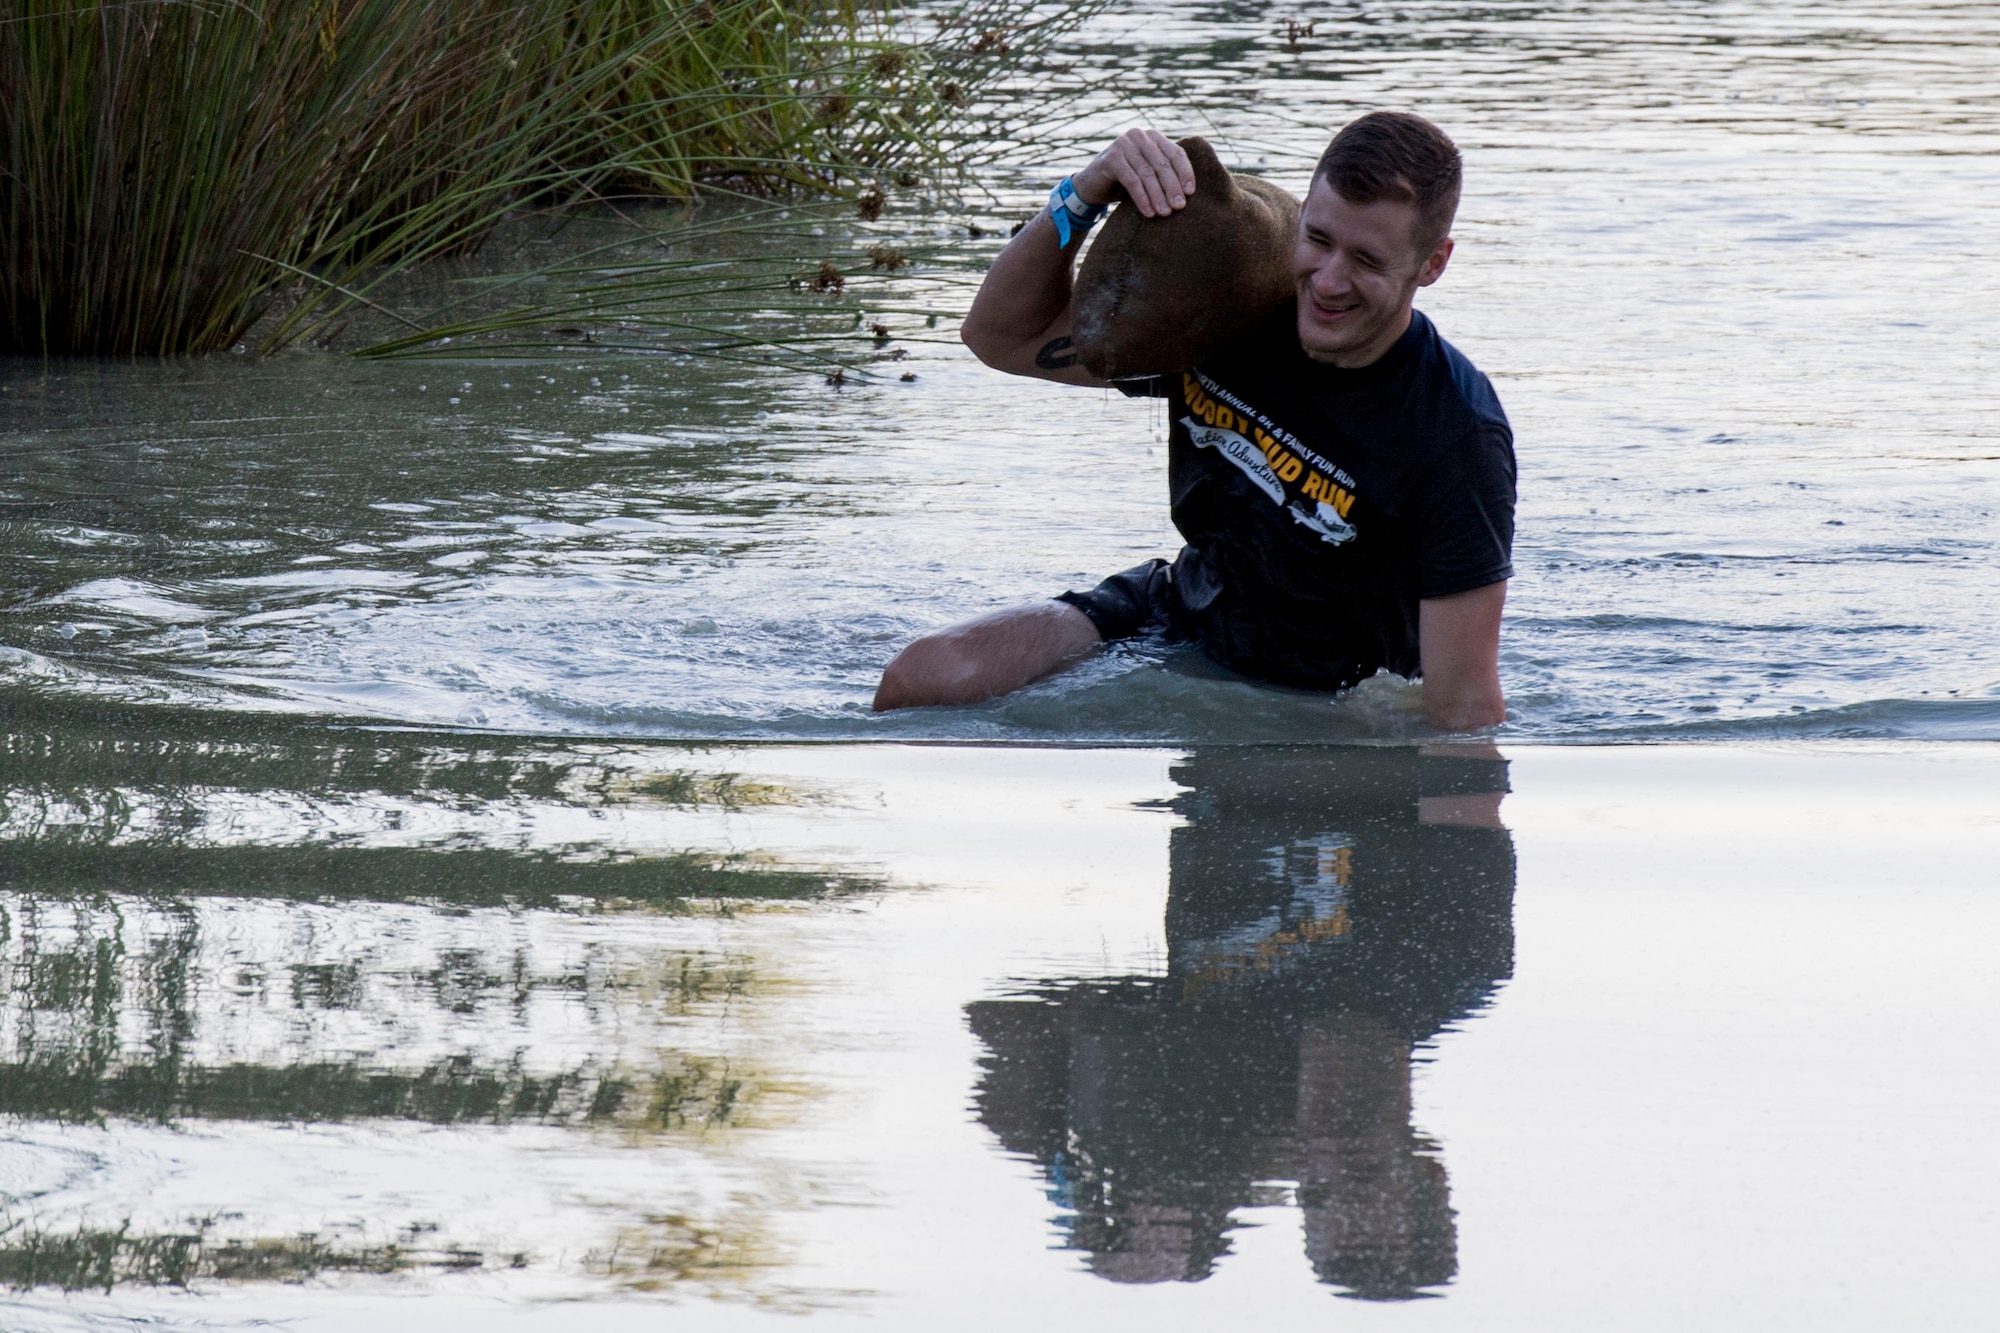 A Moody Mud Run participant carries a sandbag through several feet of water, May 6, 2017, in Ray City, Ga. The Fourth Annual Moody Mud consisted of both adult and child course that challenged more than 600 participants with obstacles over 4.2 miles. (U.S. Air Force photo by Staff Sgt. Eric Summers Jr.)